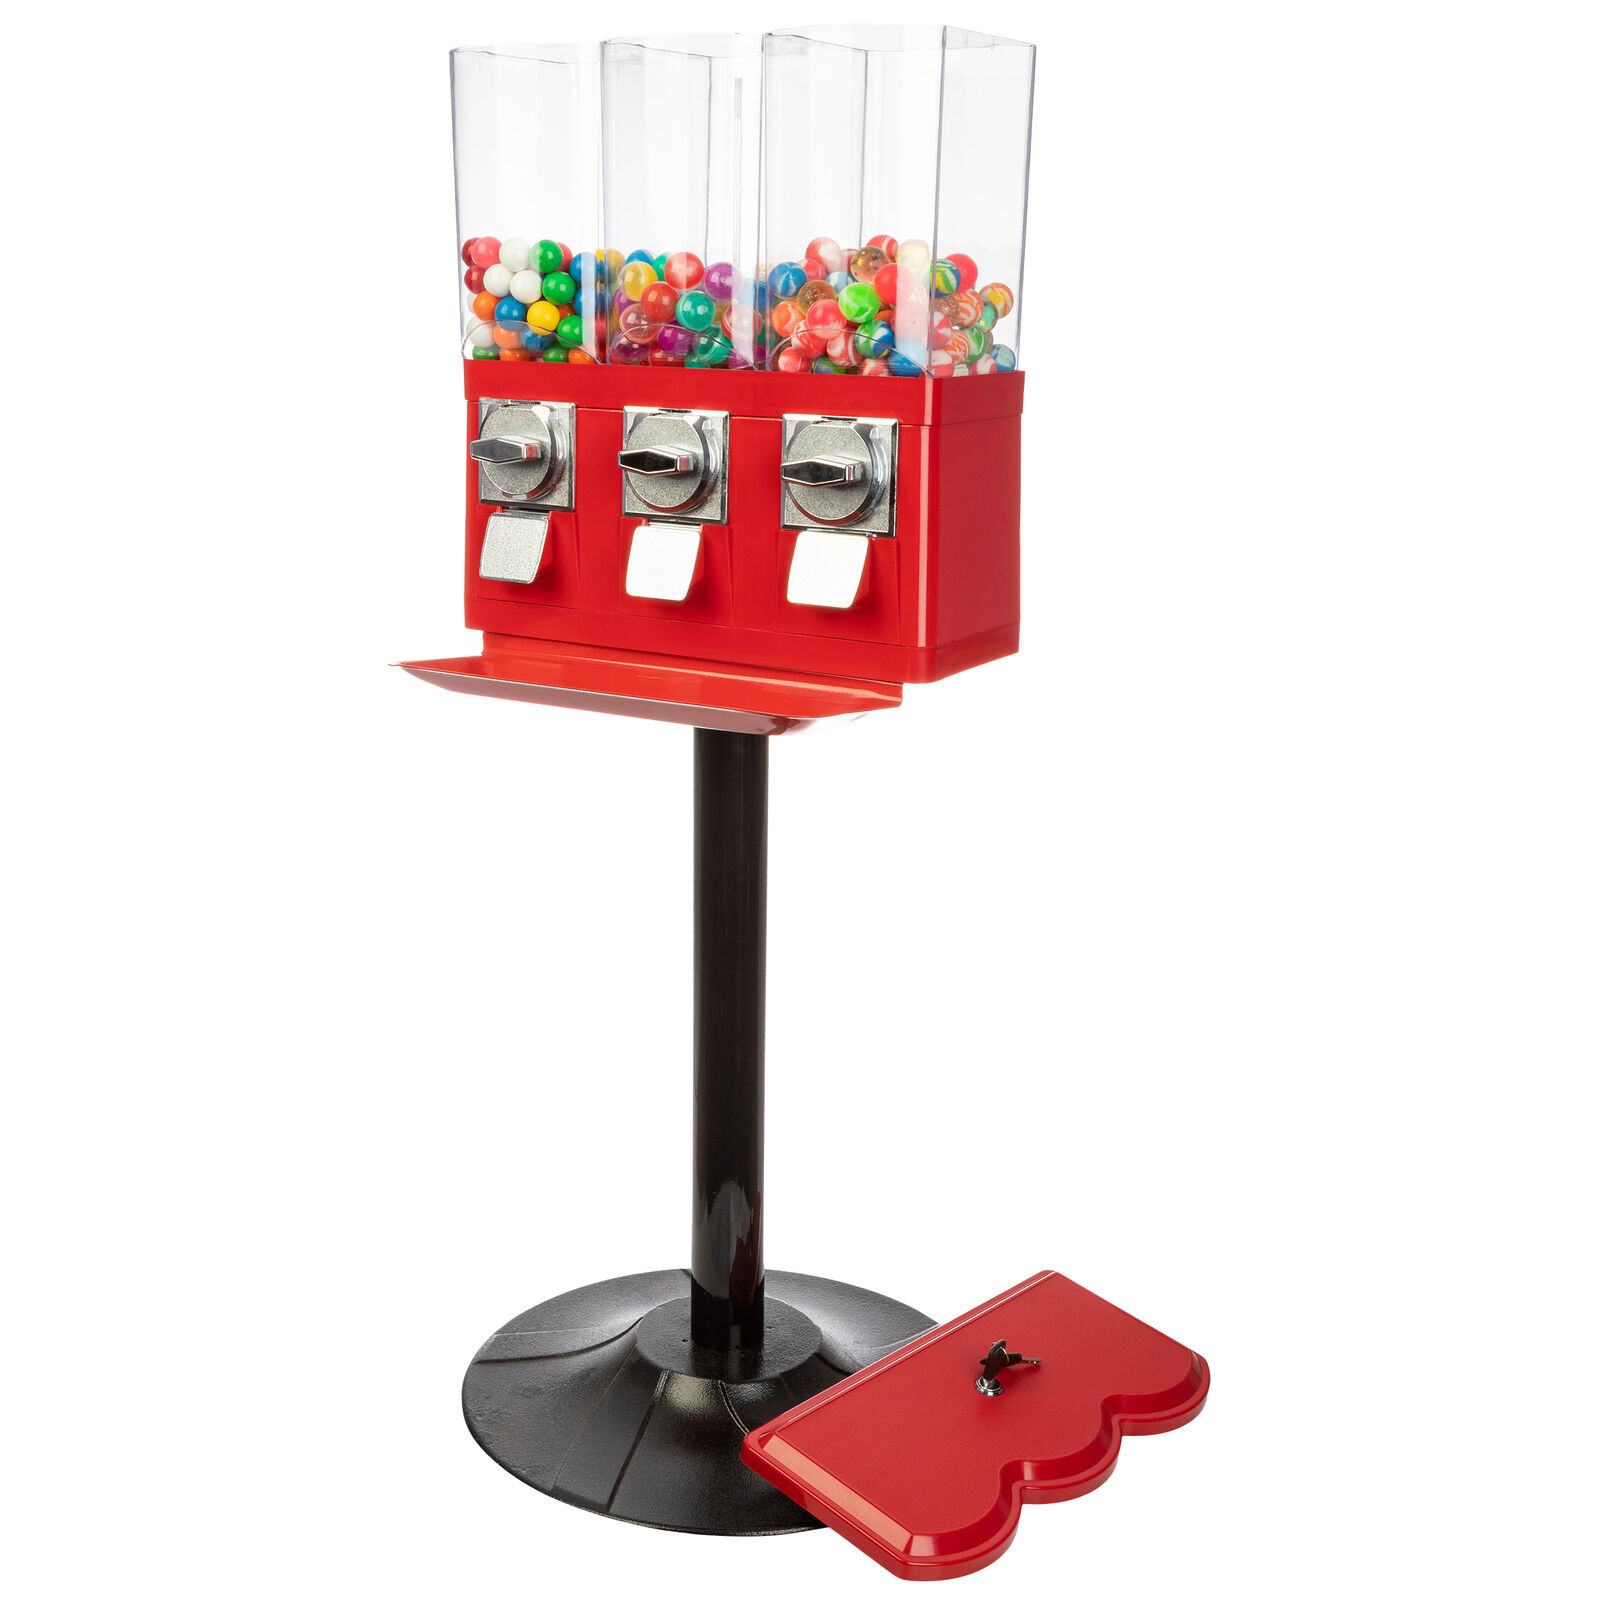 Triple Candy Gumball Commercial Vending Machine